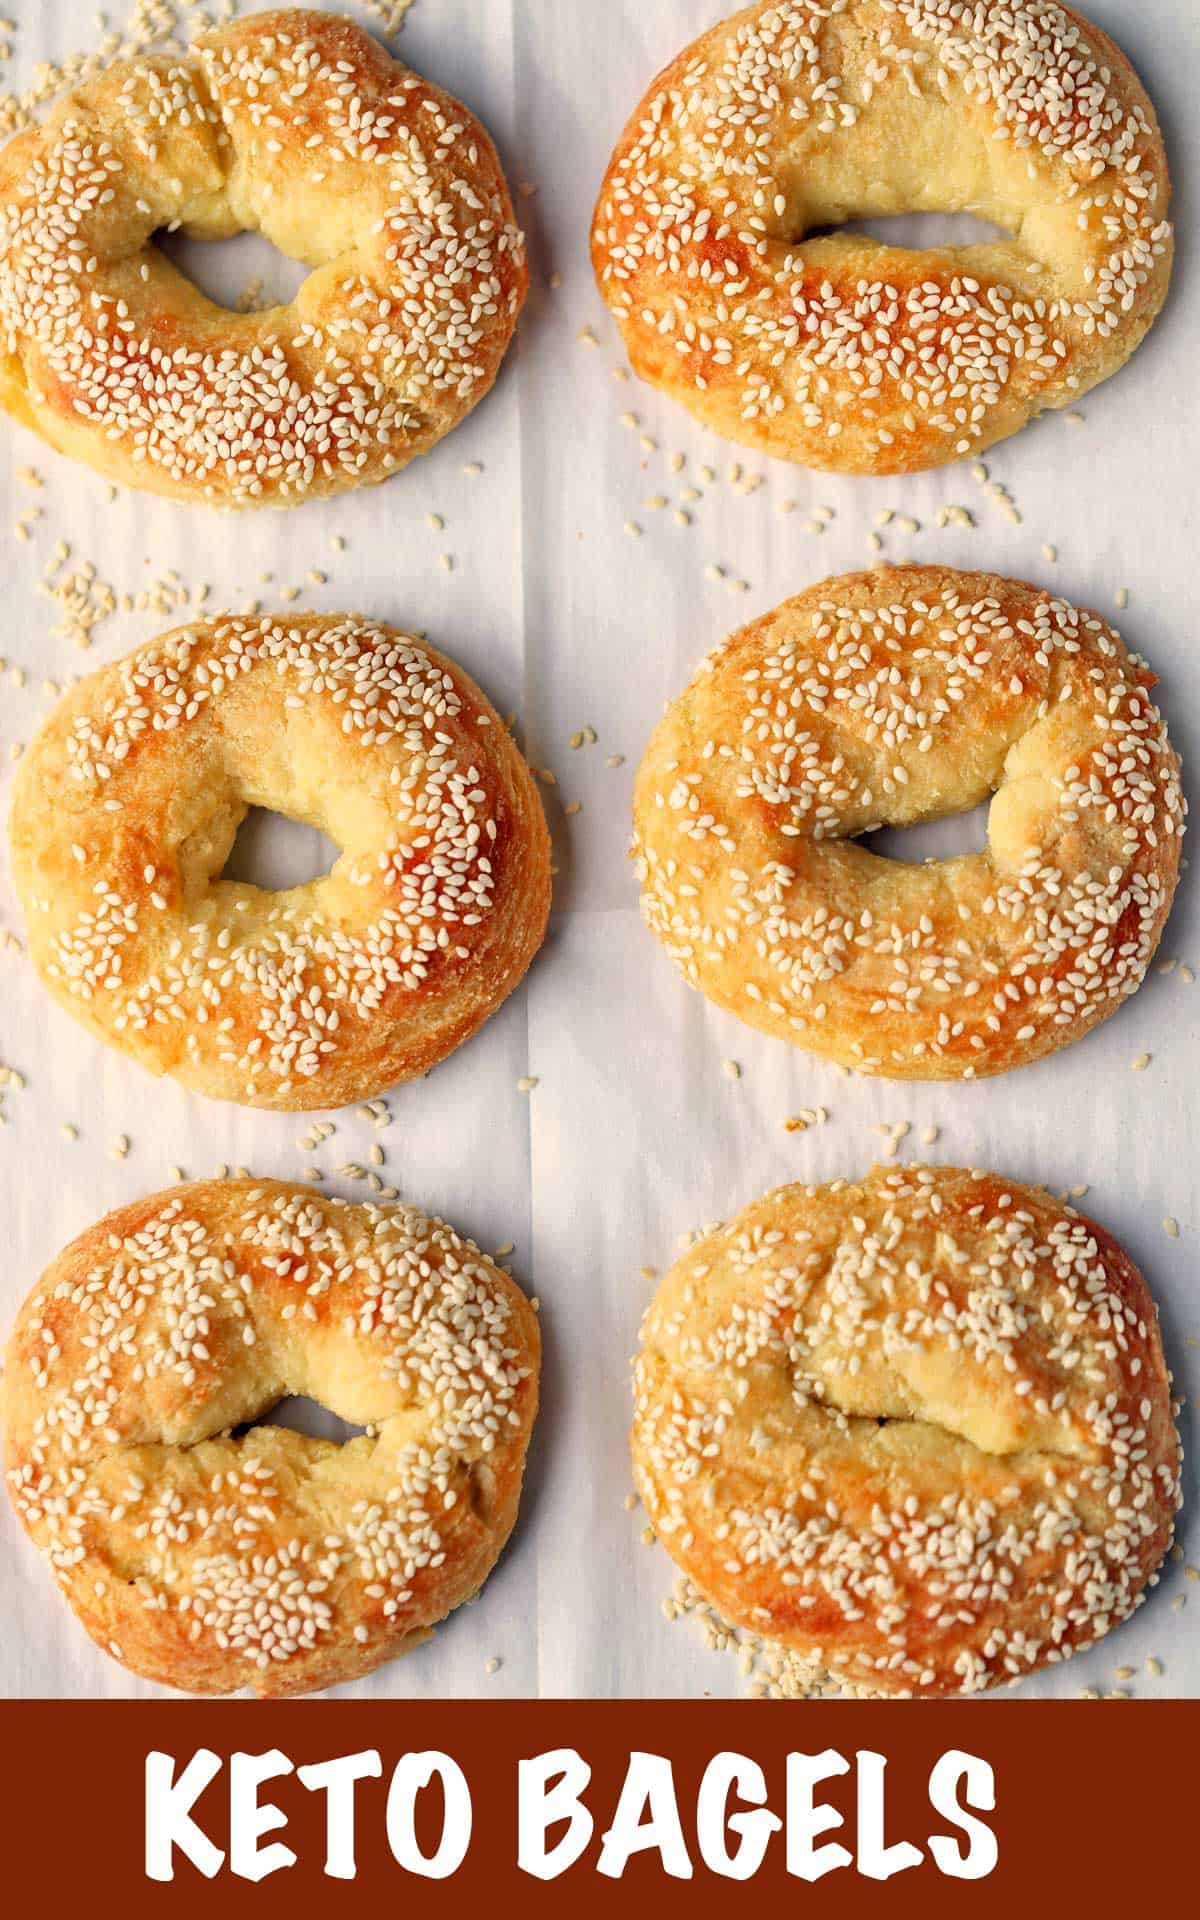 Low-carb bagels topped with sesame seeds.